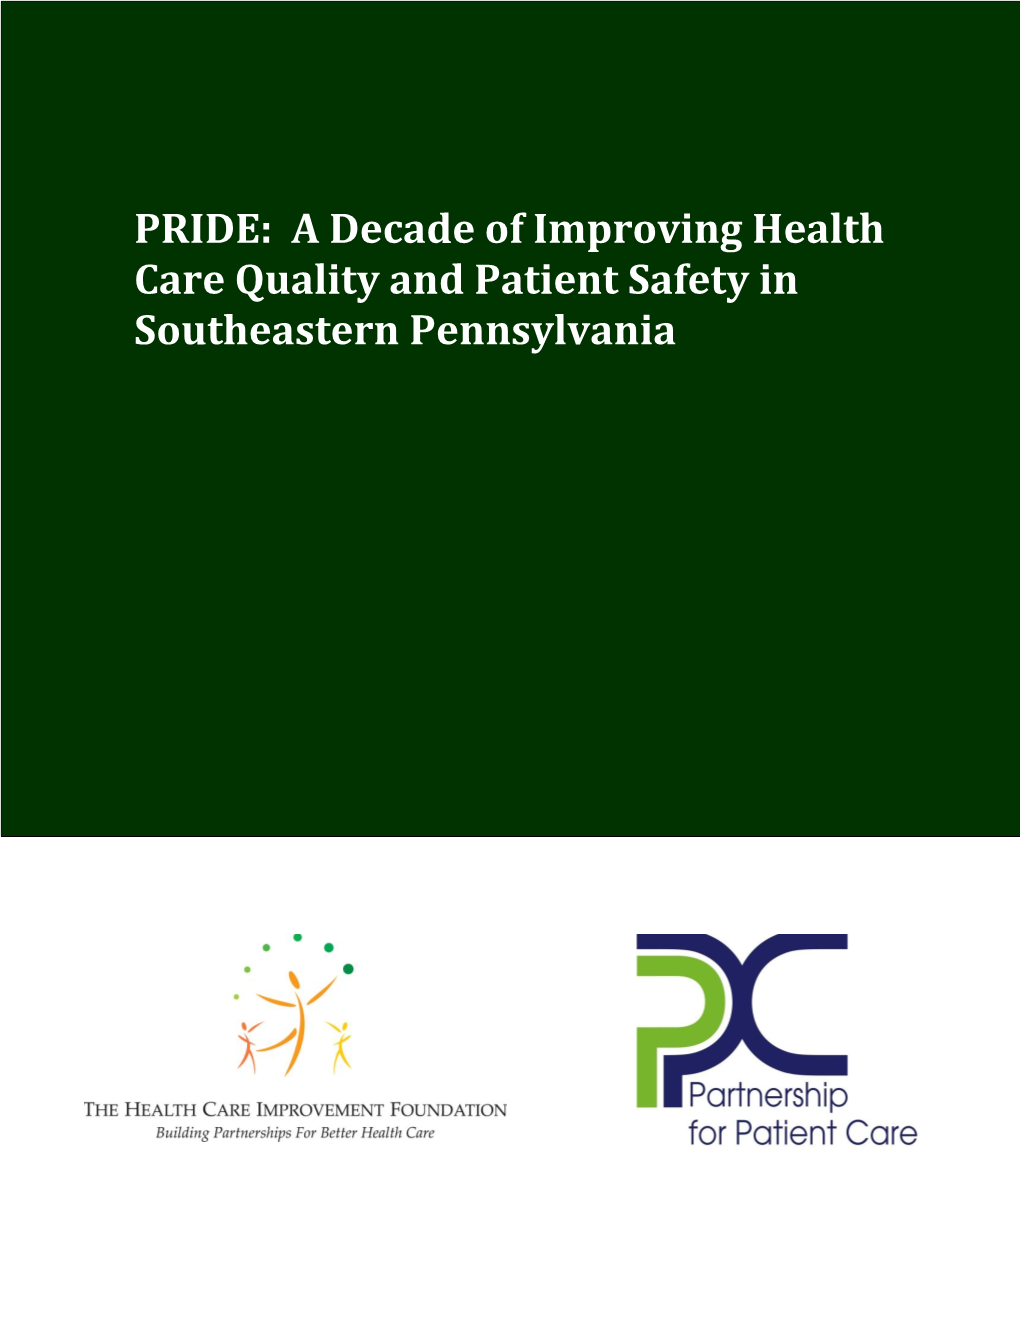 PRIDE: a Decade of Improving Health Care Quality and Patient Safety in Southeastern Pennsylvania